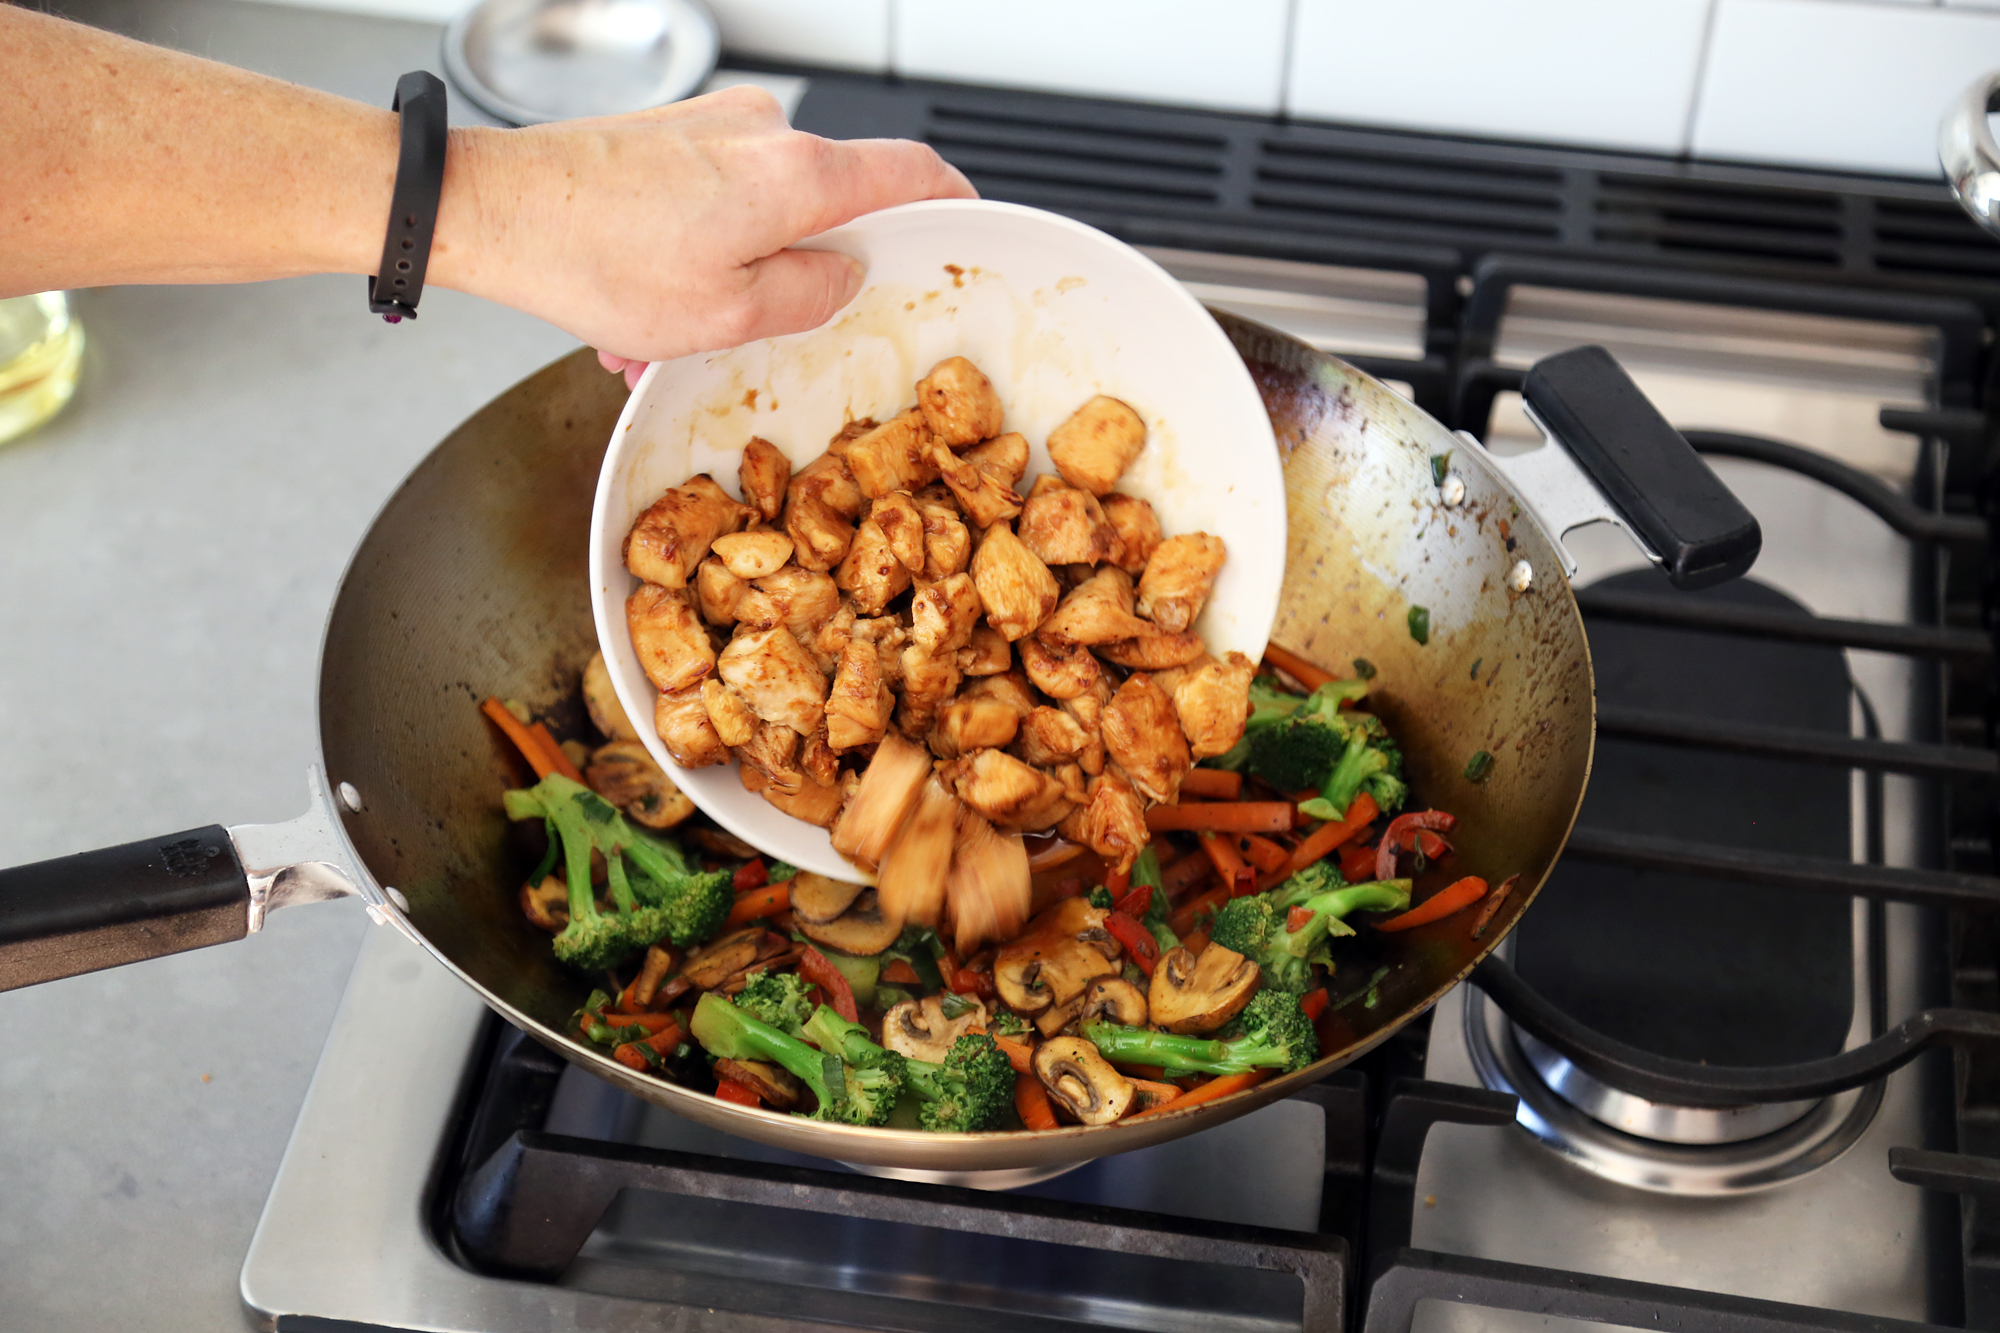 Add the chicken back to the wok along with the sauce.